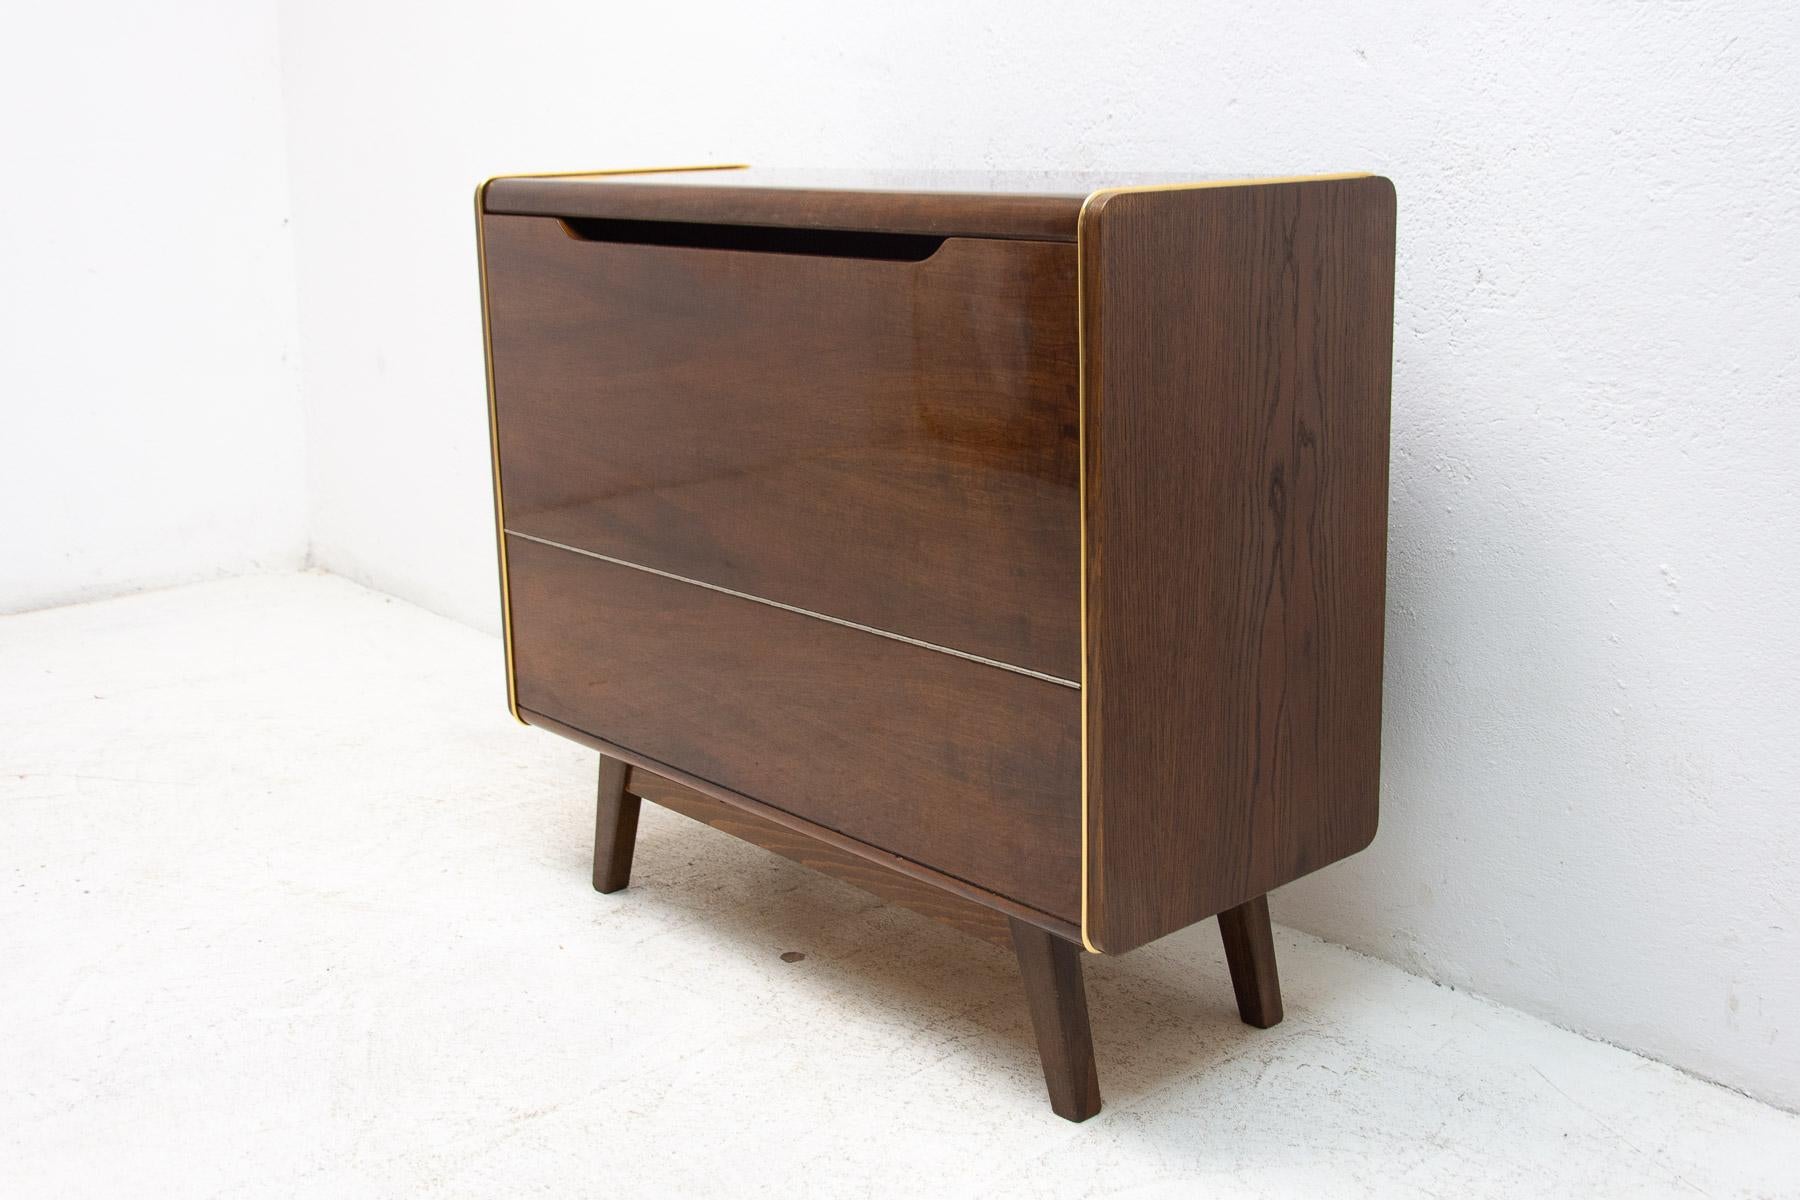 Mid century dresser designed by Hubert Nepožitek & Bohumil Landsman for Jitona in the 1970´s.
It was made as a part of living room sector model U-372386. Made in Czechoslovakia.
In very good Vintage condition, showing slight signs of age and